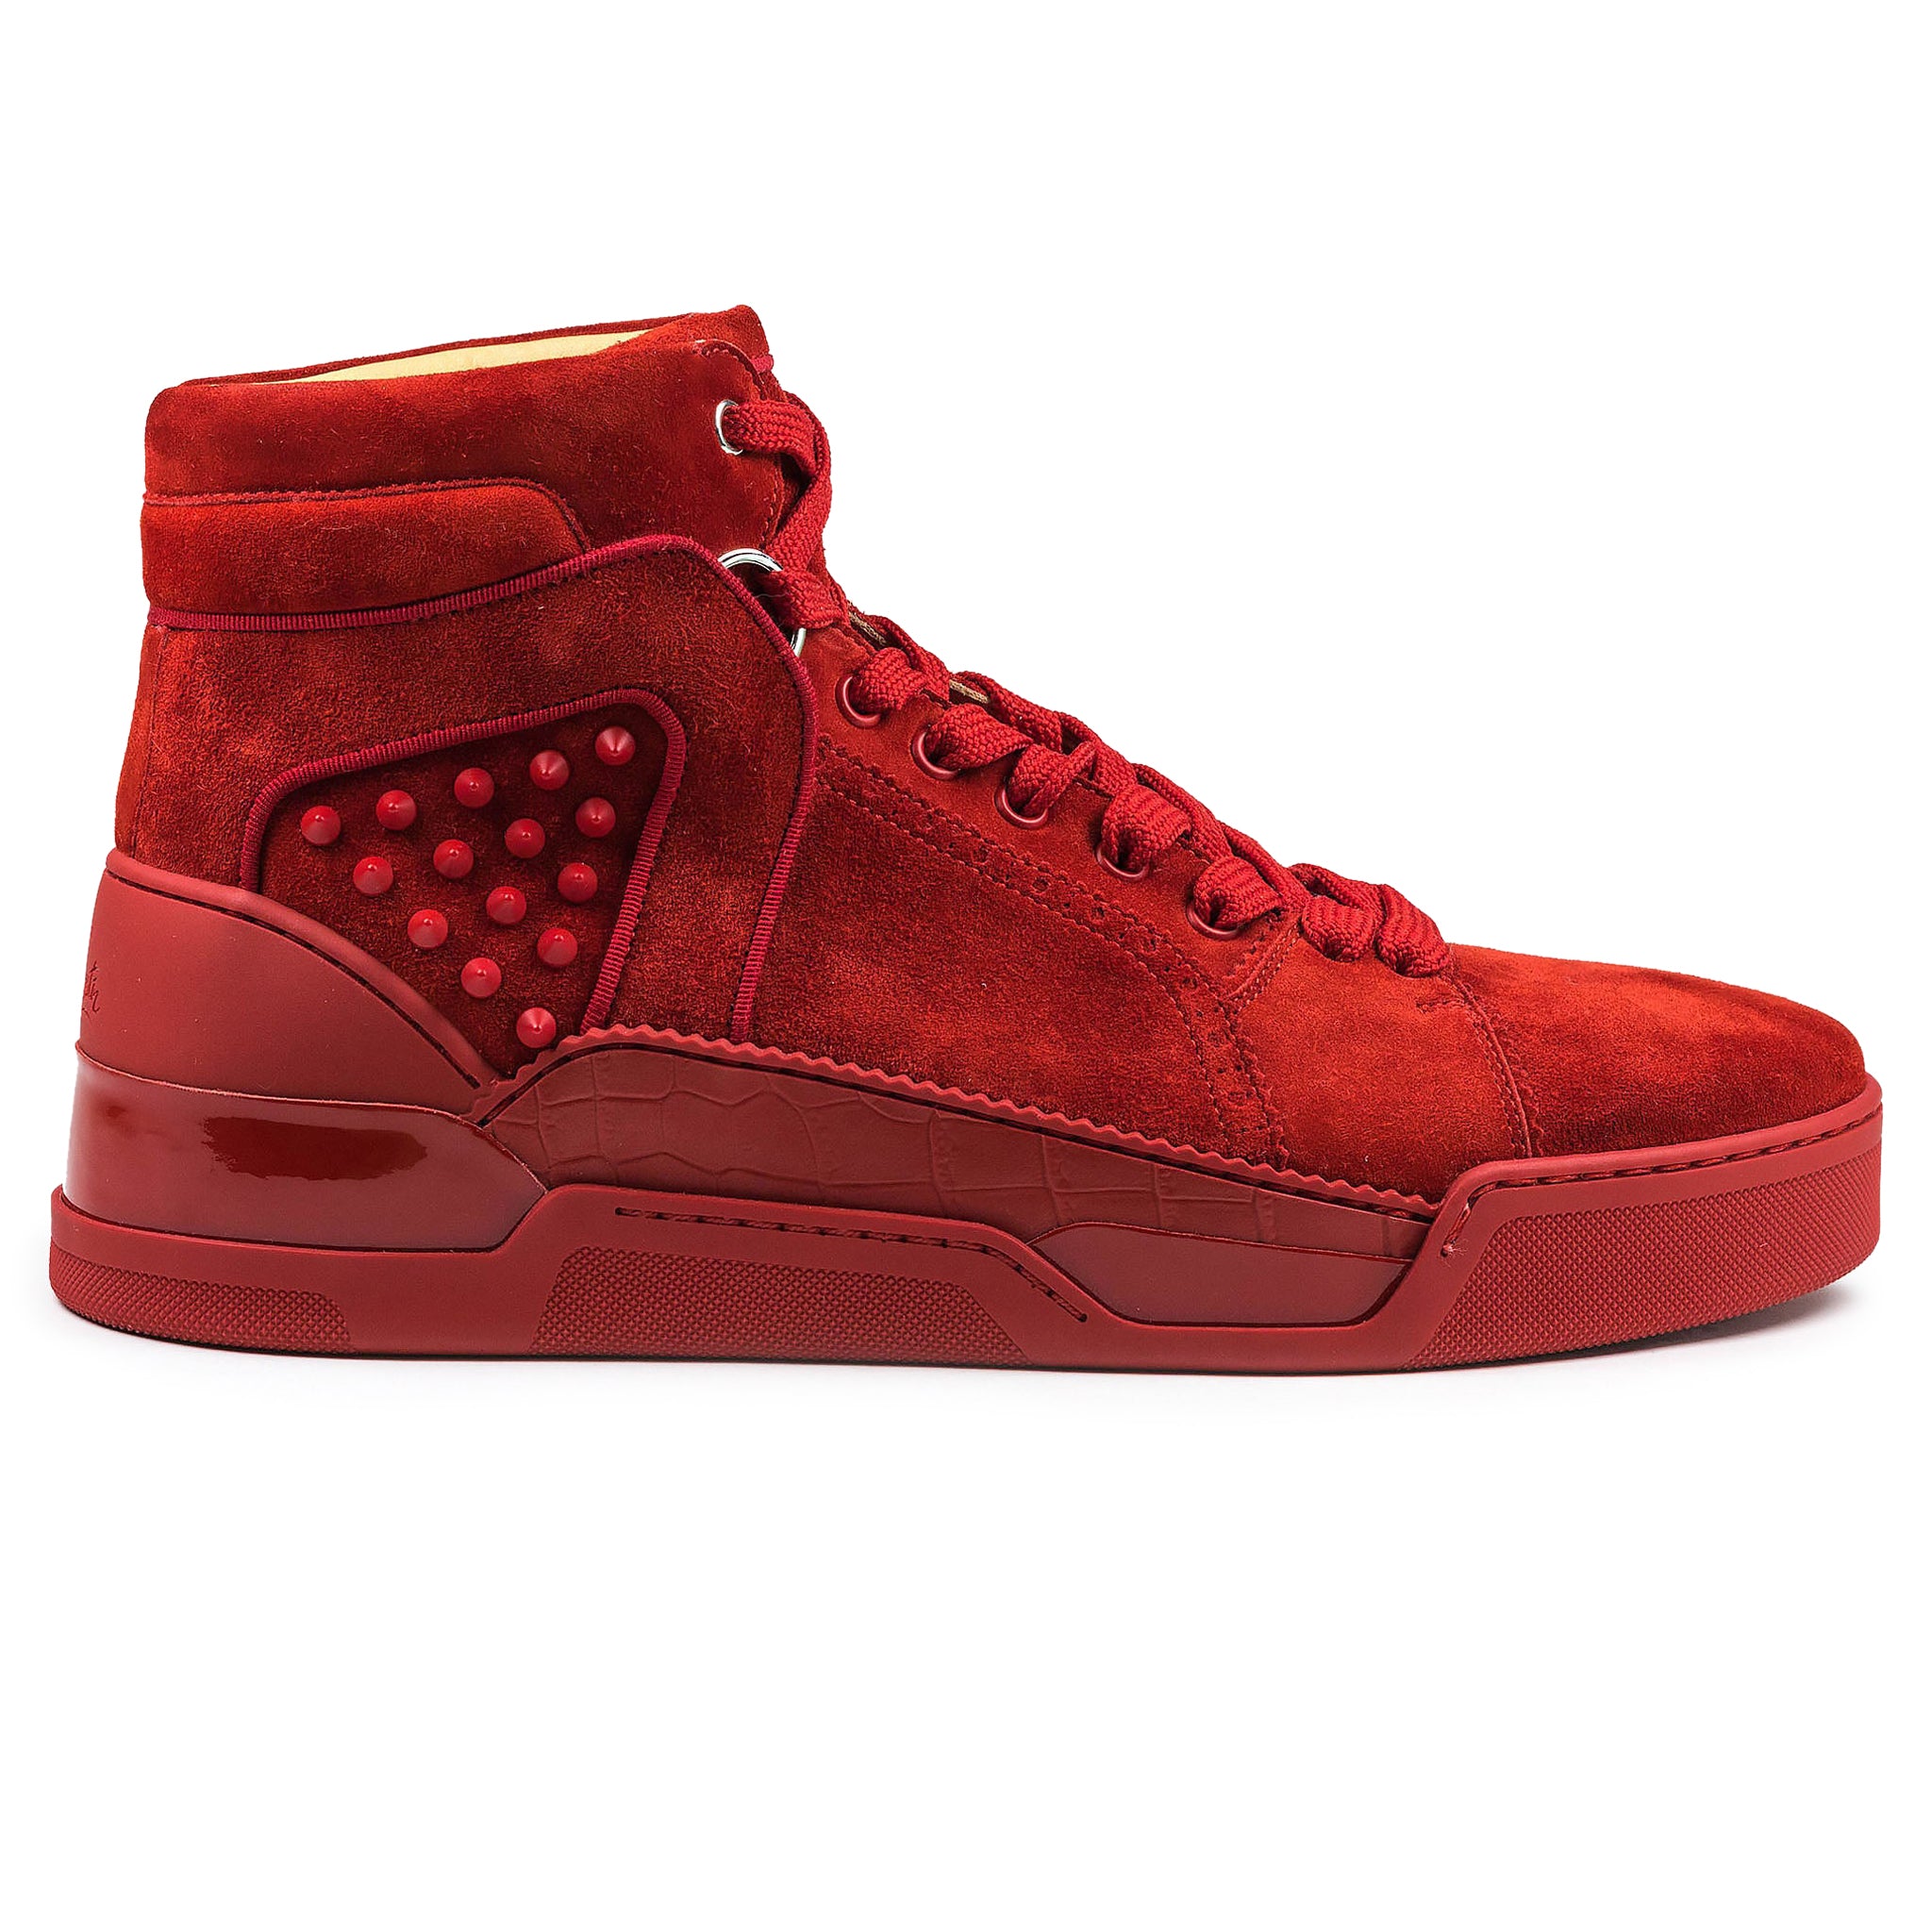 CB Red Bottoms  Louis vuitton shoes heels, Red bottoms, Christian louboutin  shoes